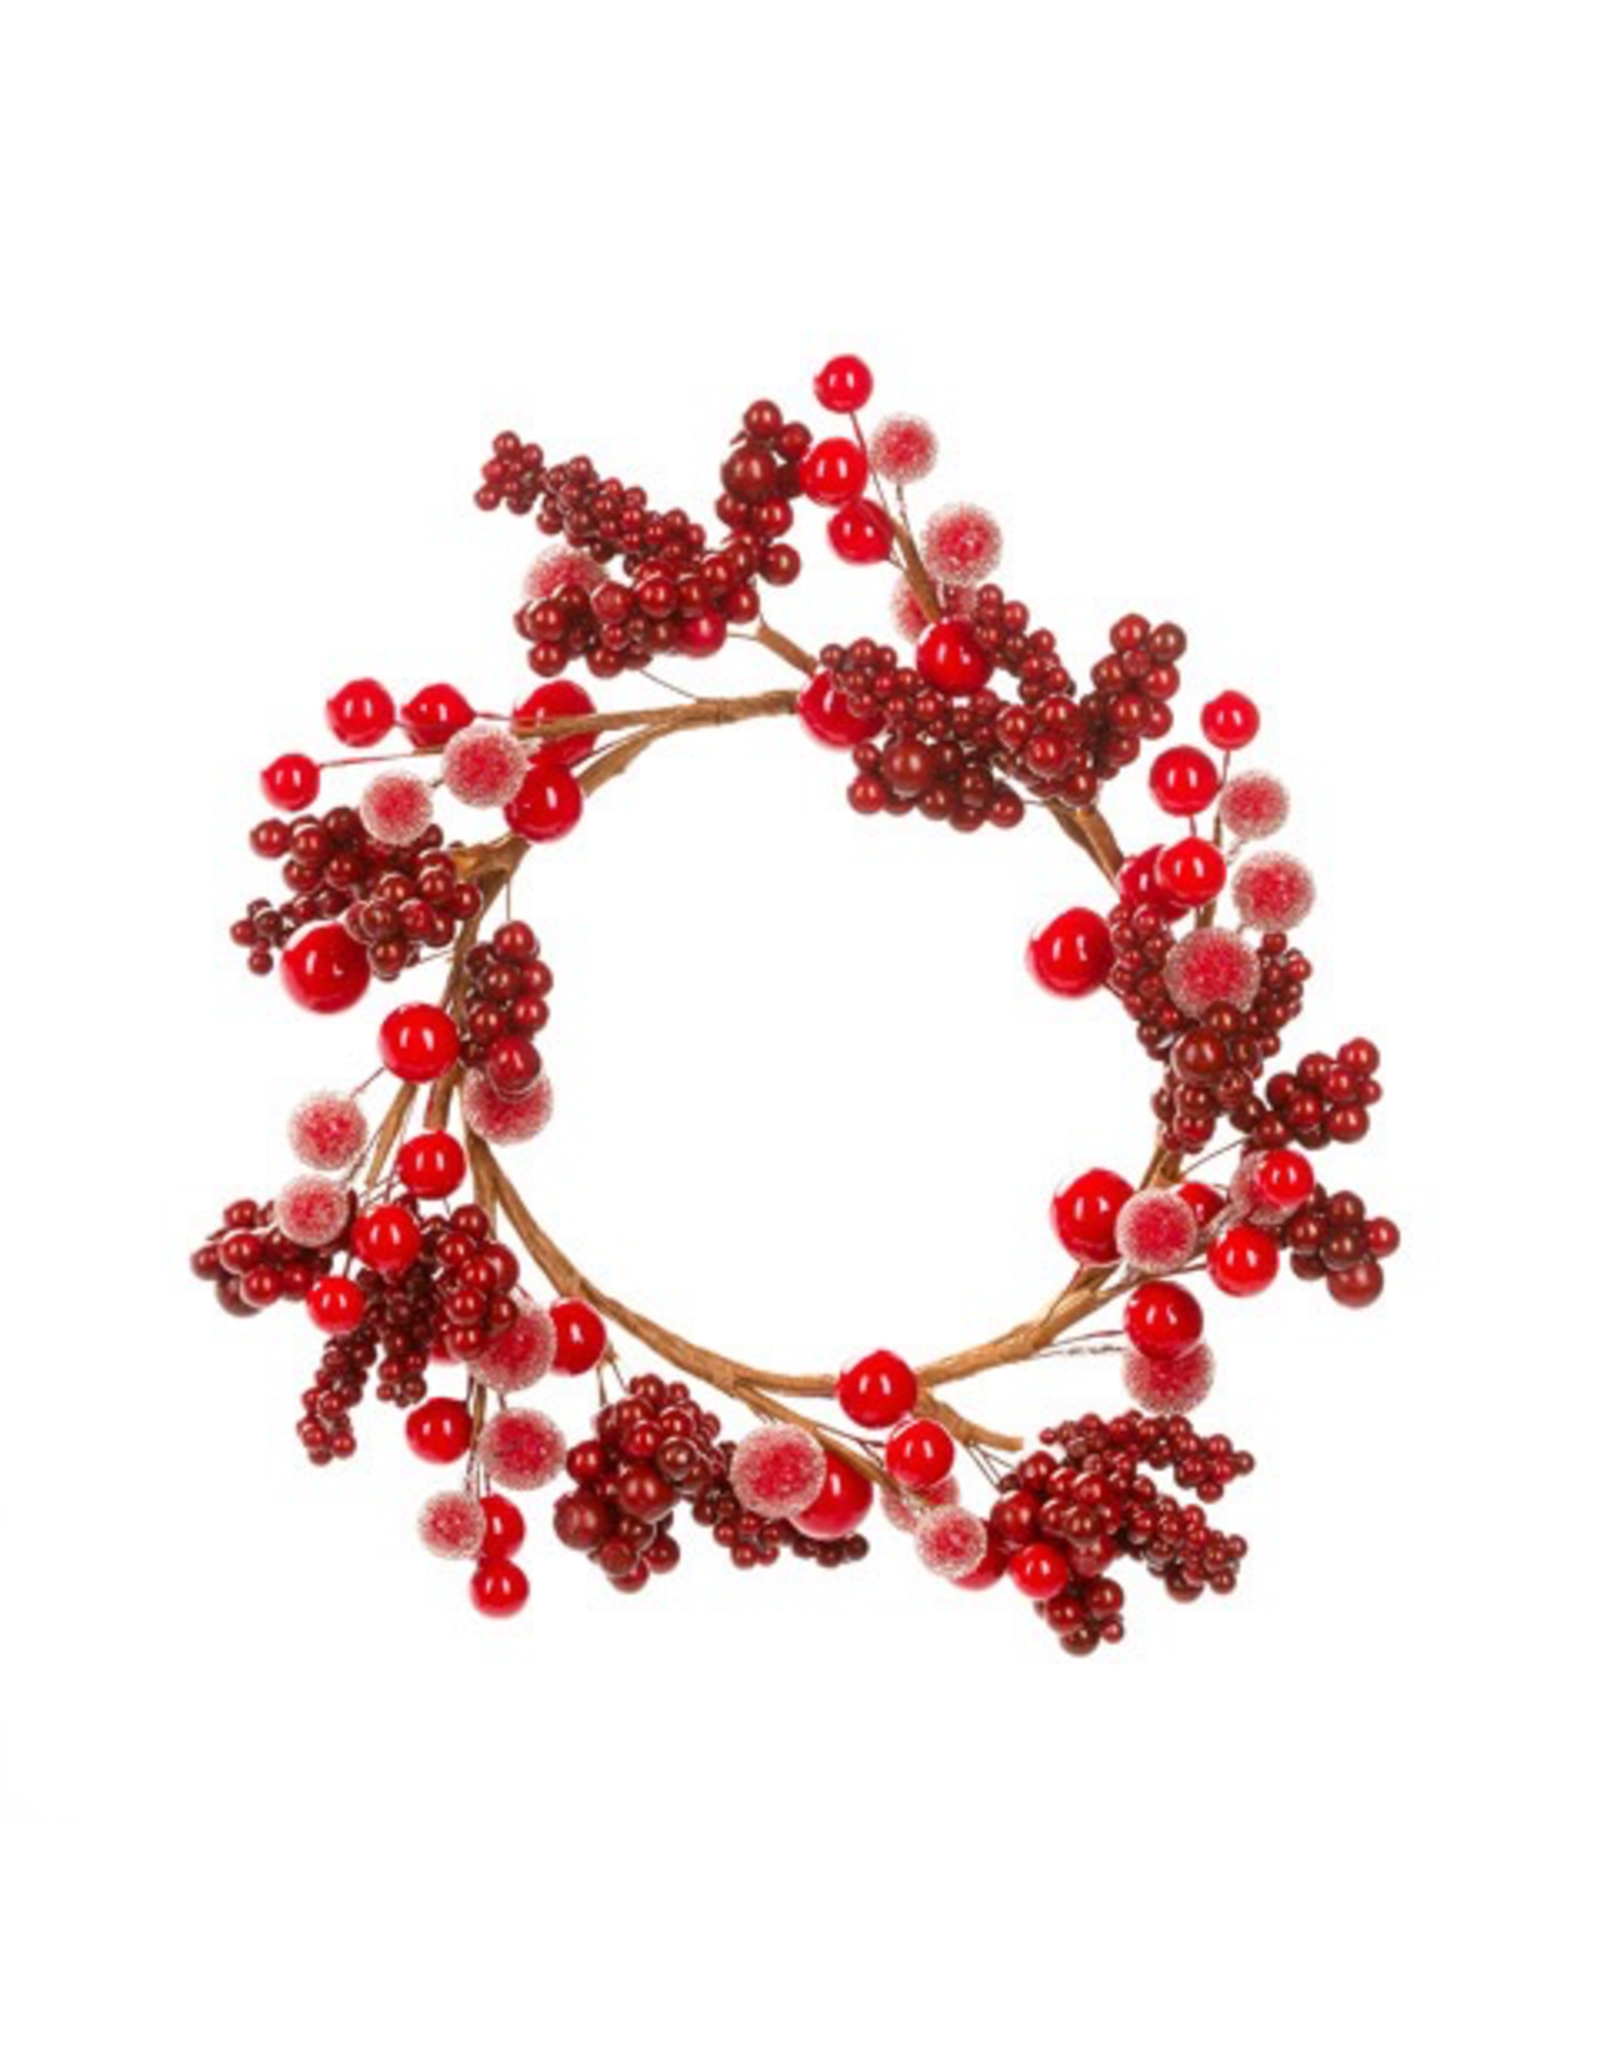 Darice Christmas Candle Ring Mixed Red Berries For 4.5 inch Pillar